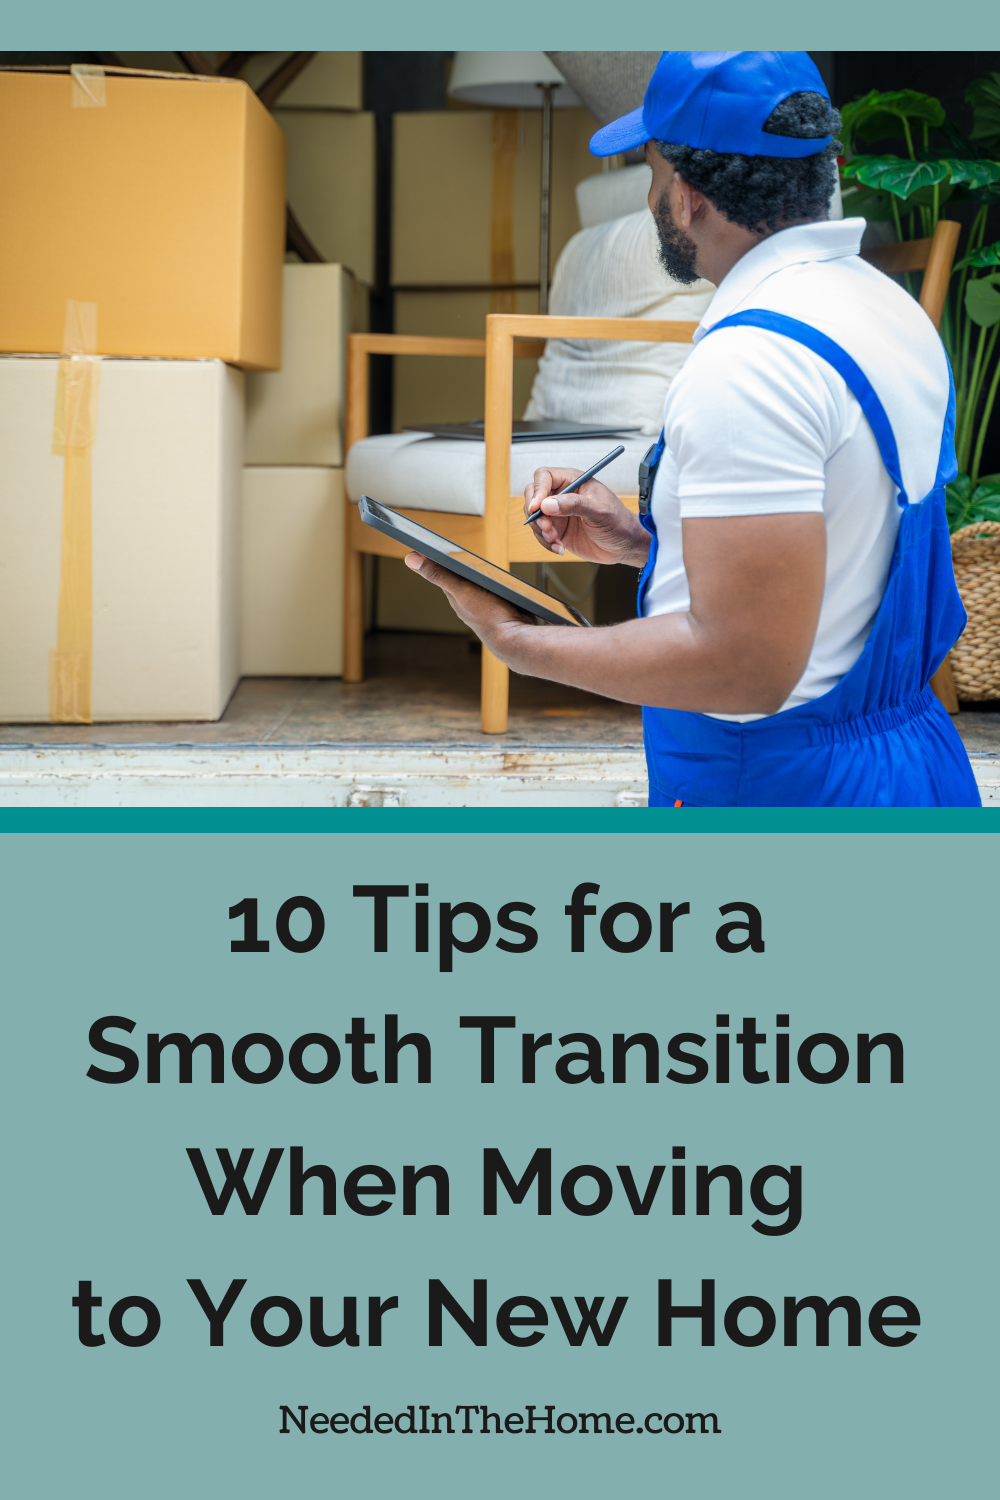 moving company worker marking ipad for what is loaded onto moving truck 10 tips for a smooth transition when moving to your new home neededinthehome